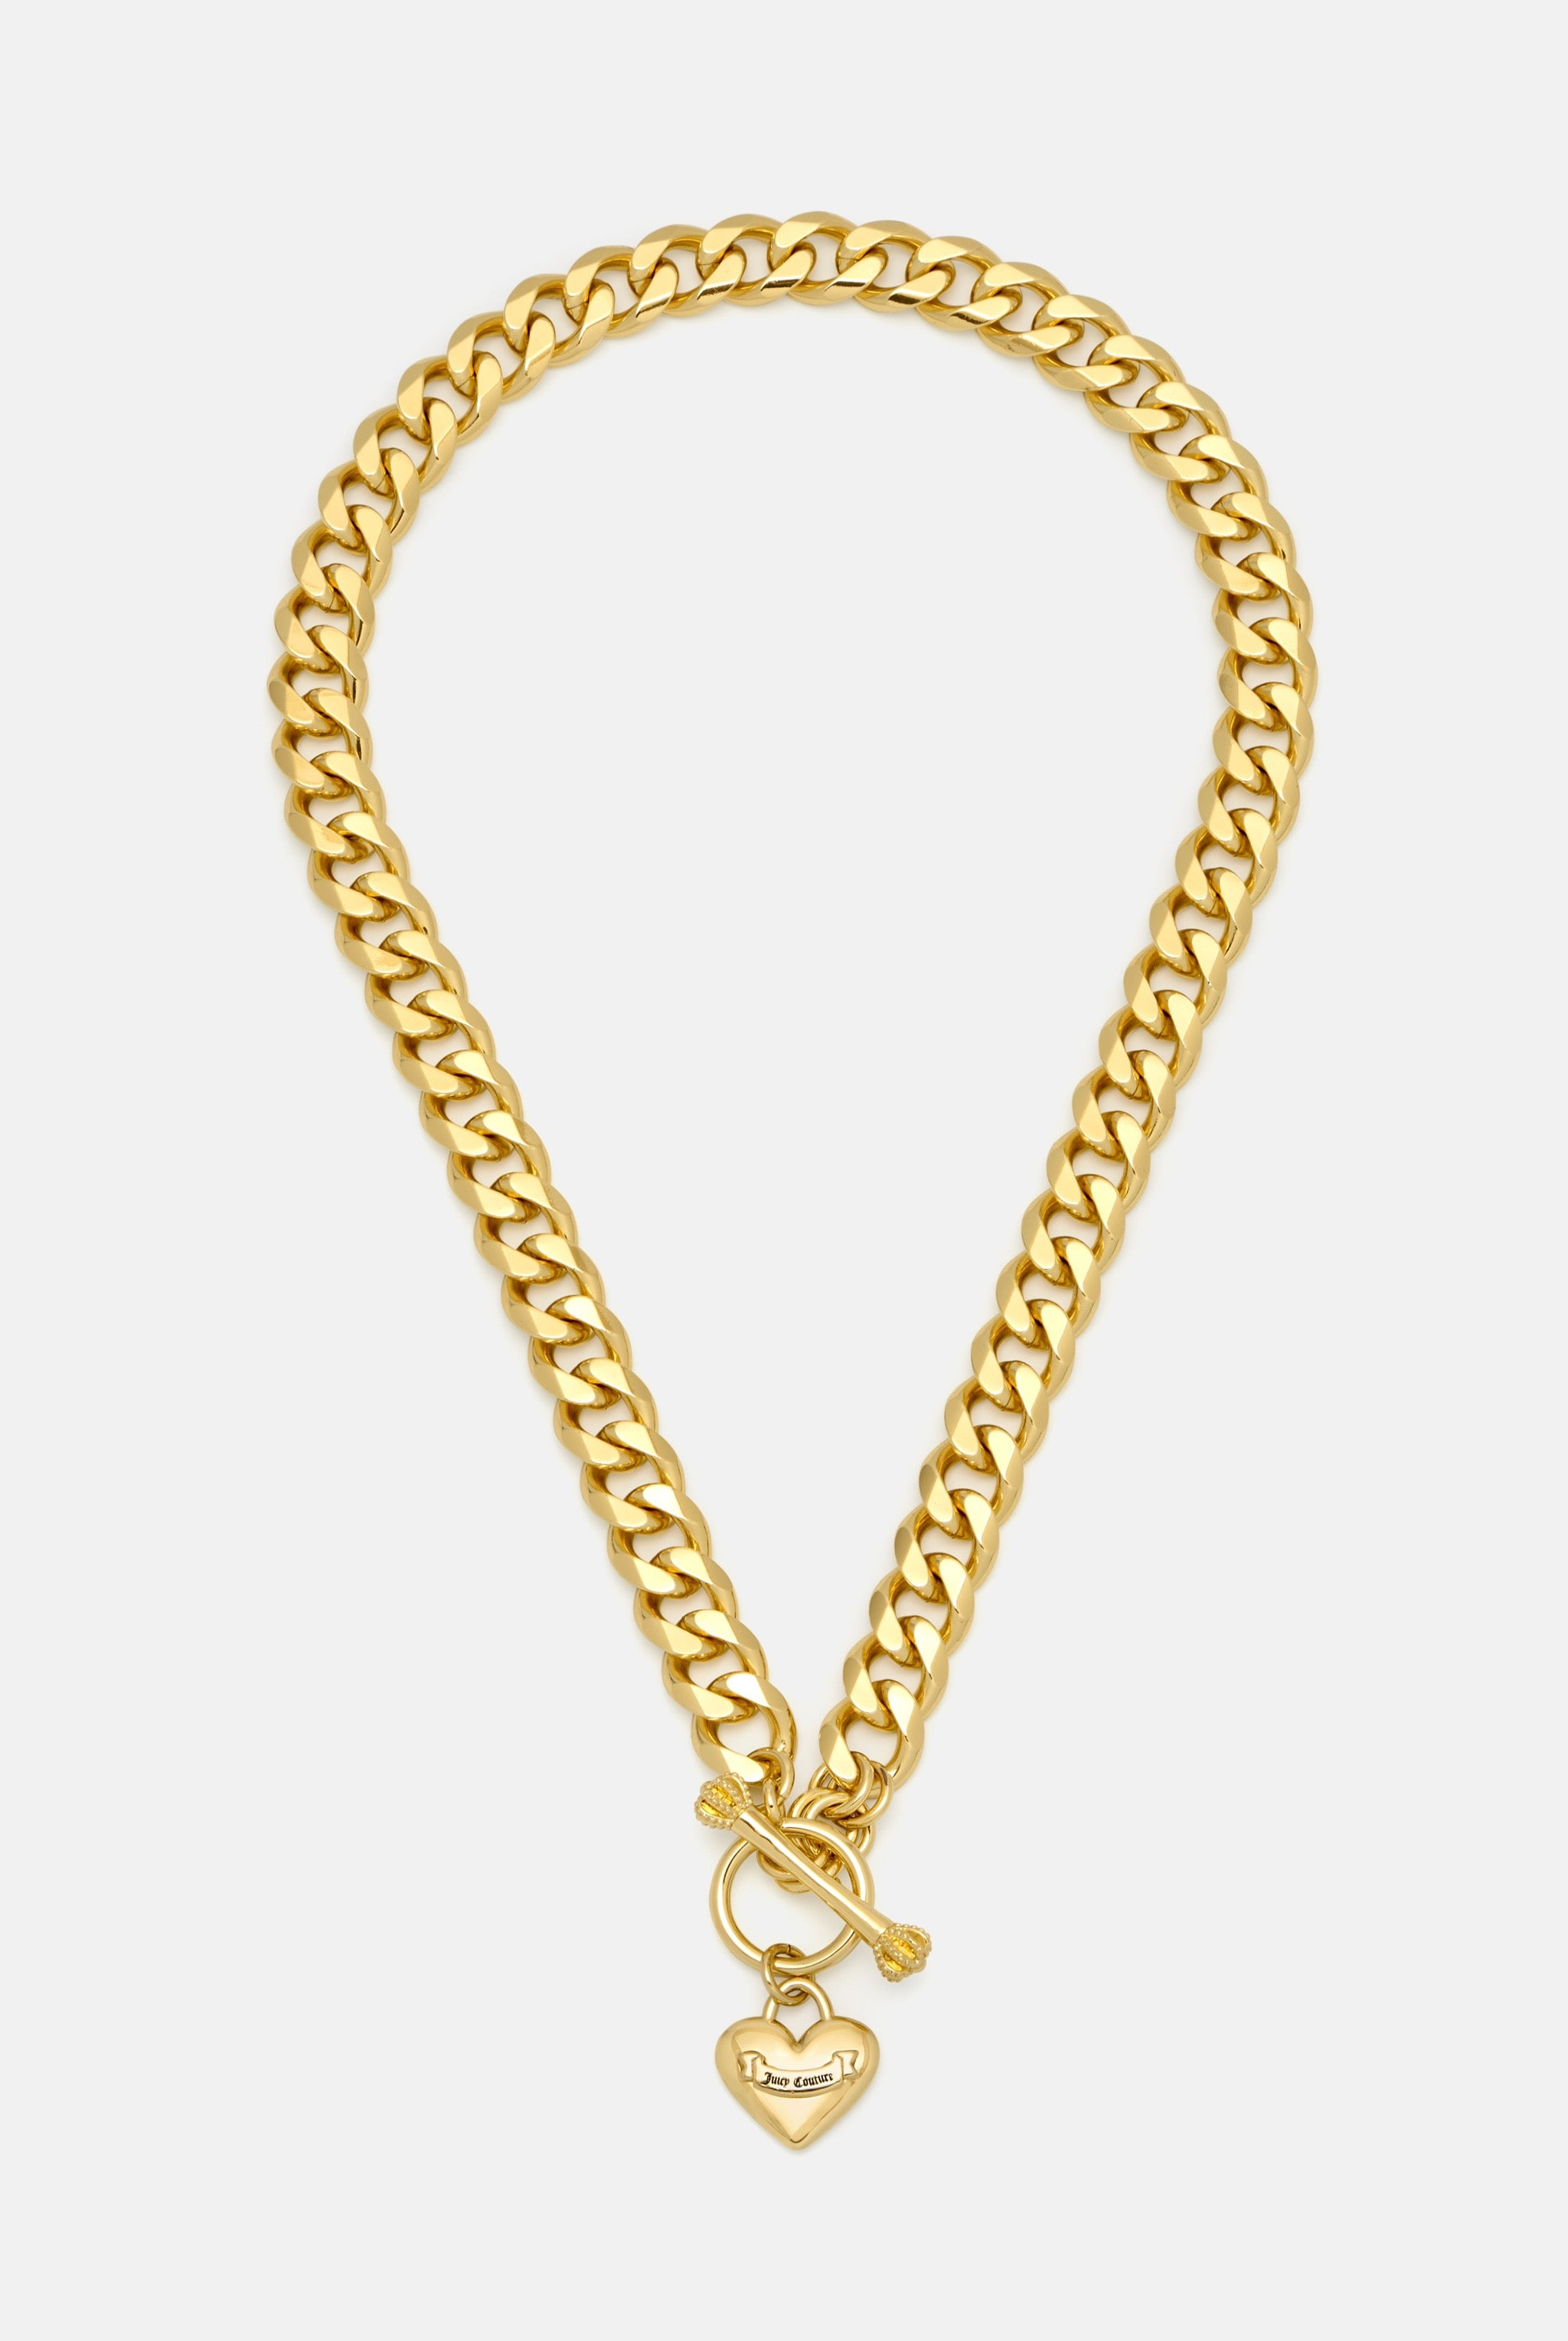  Juicy Couture Goldtone Thick Chain Heart Charm Toggle